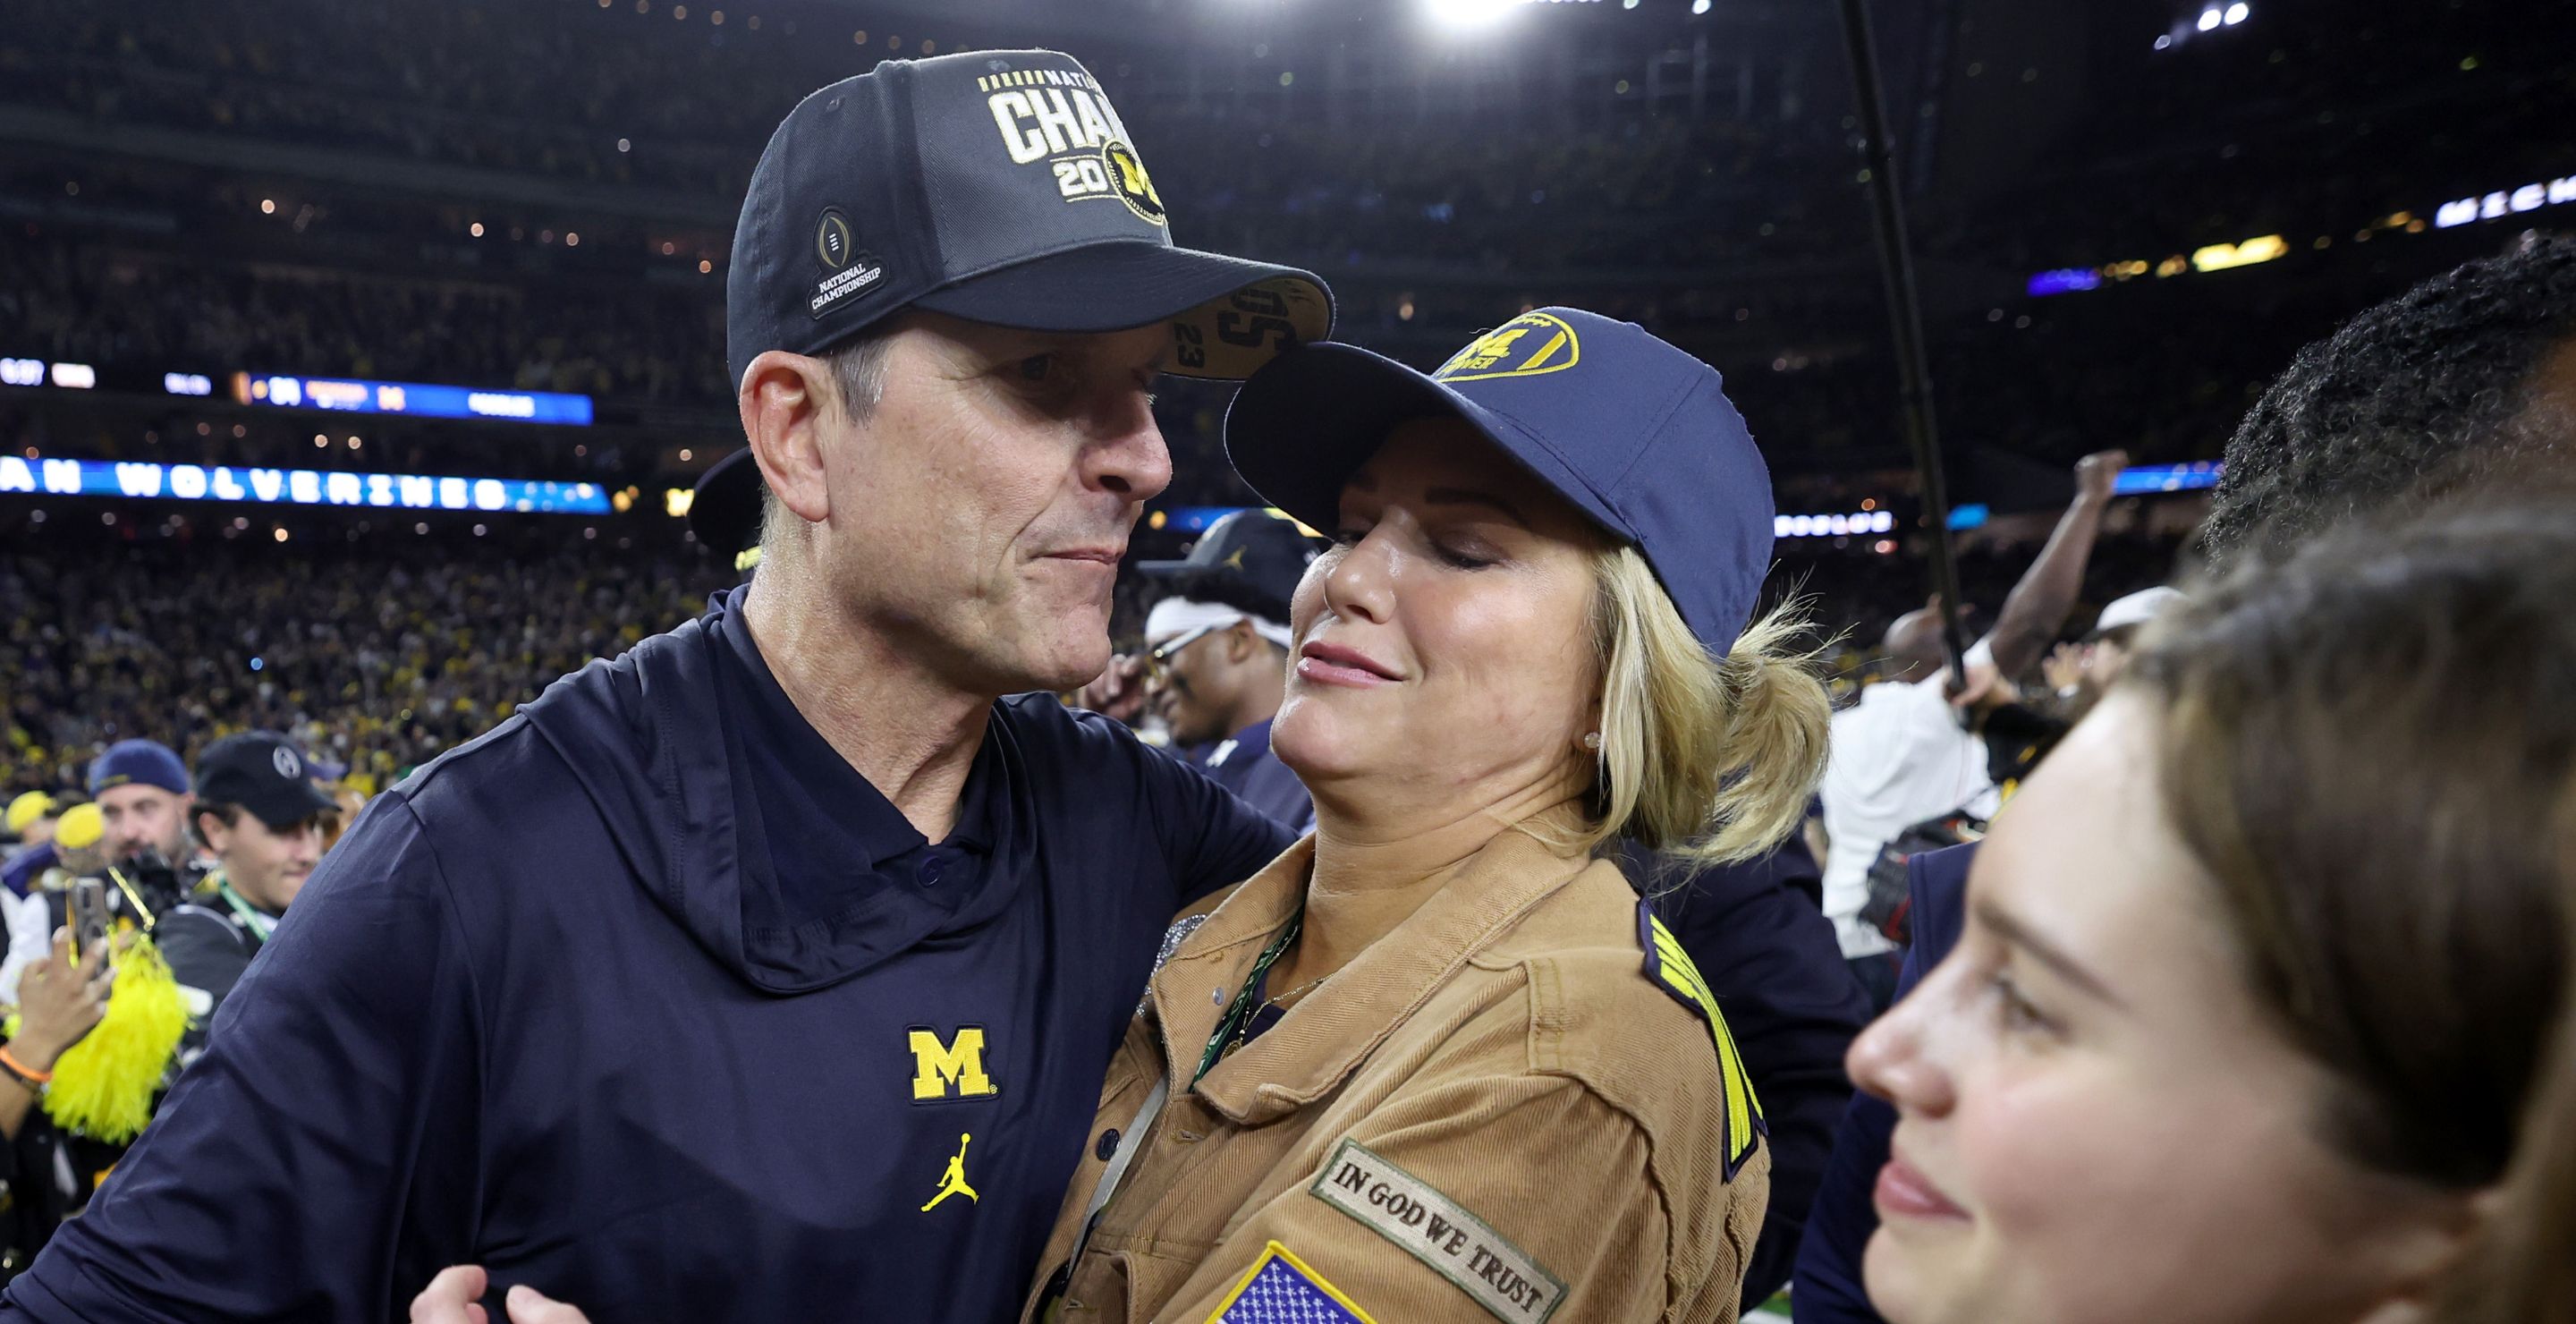 Jim Harbaugh and his wife celebrate after winning the national title.